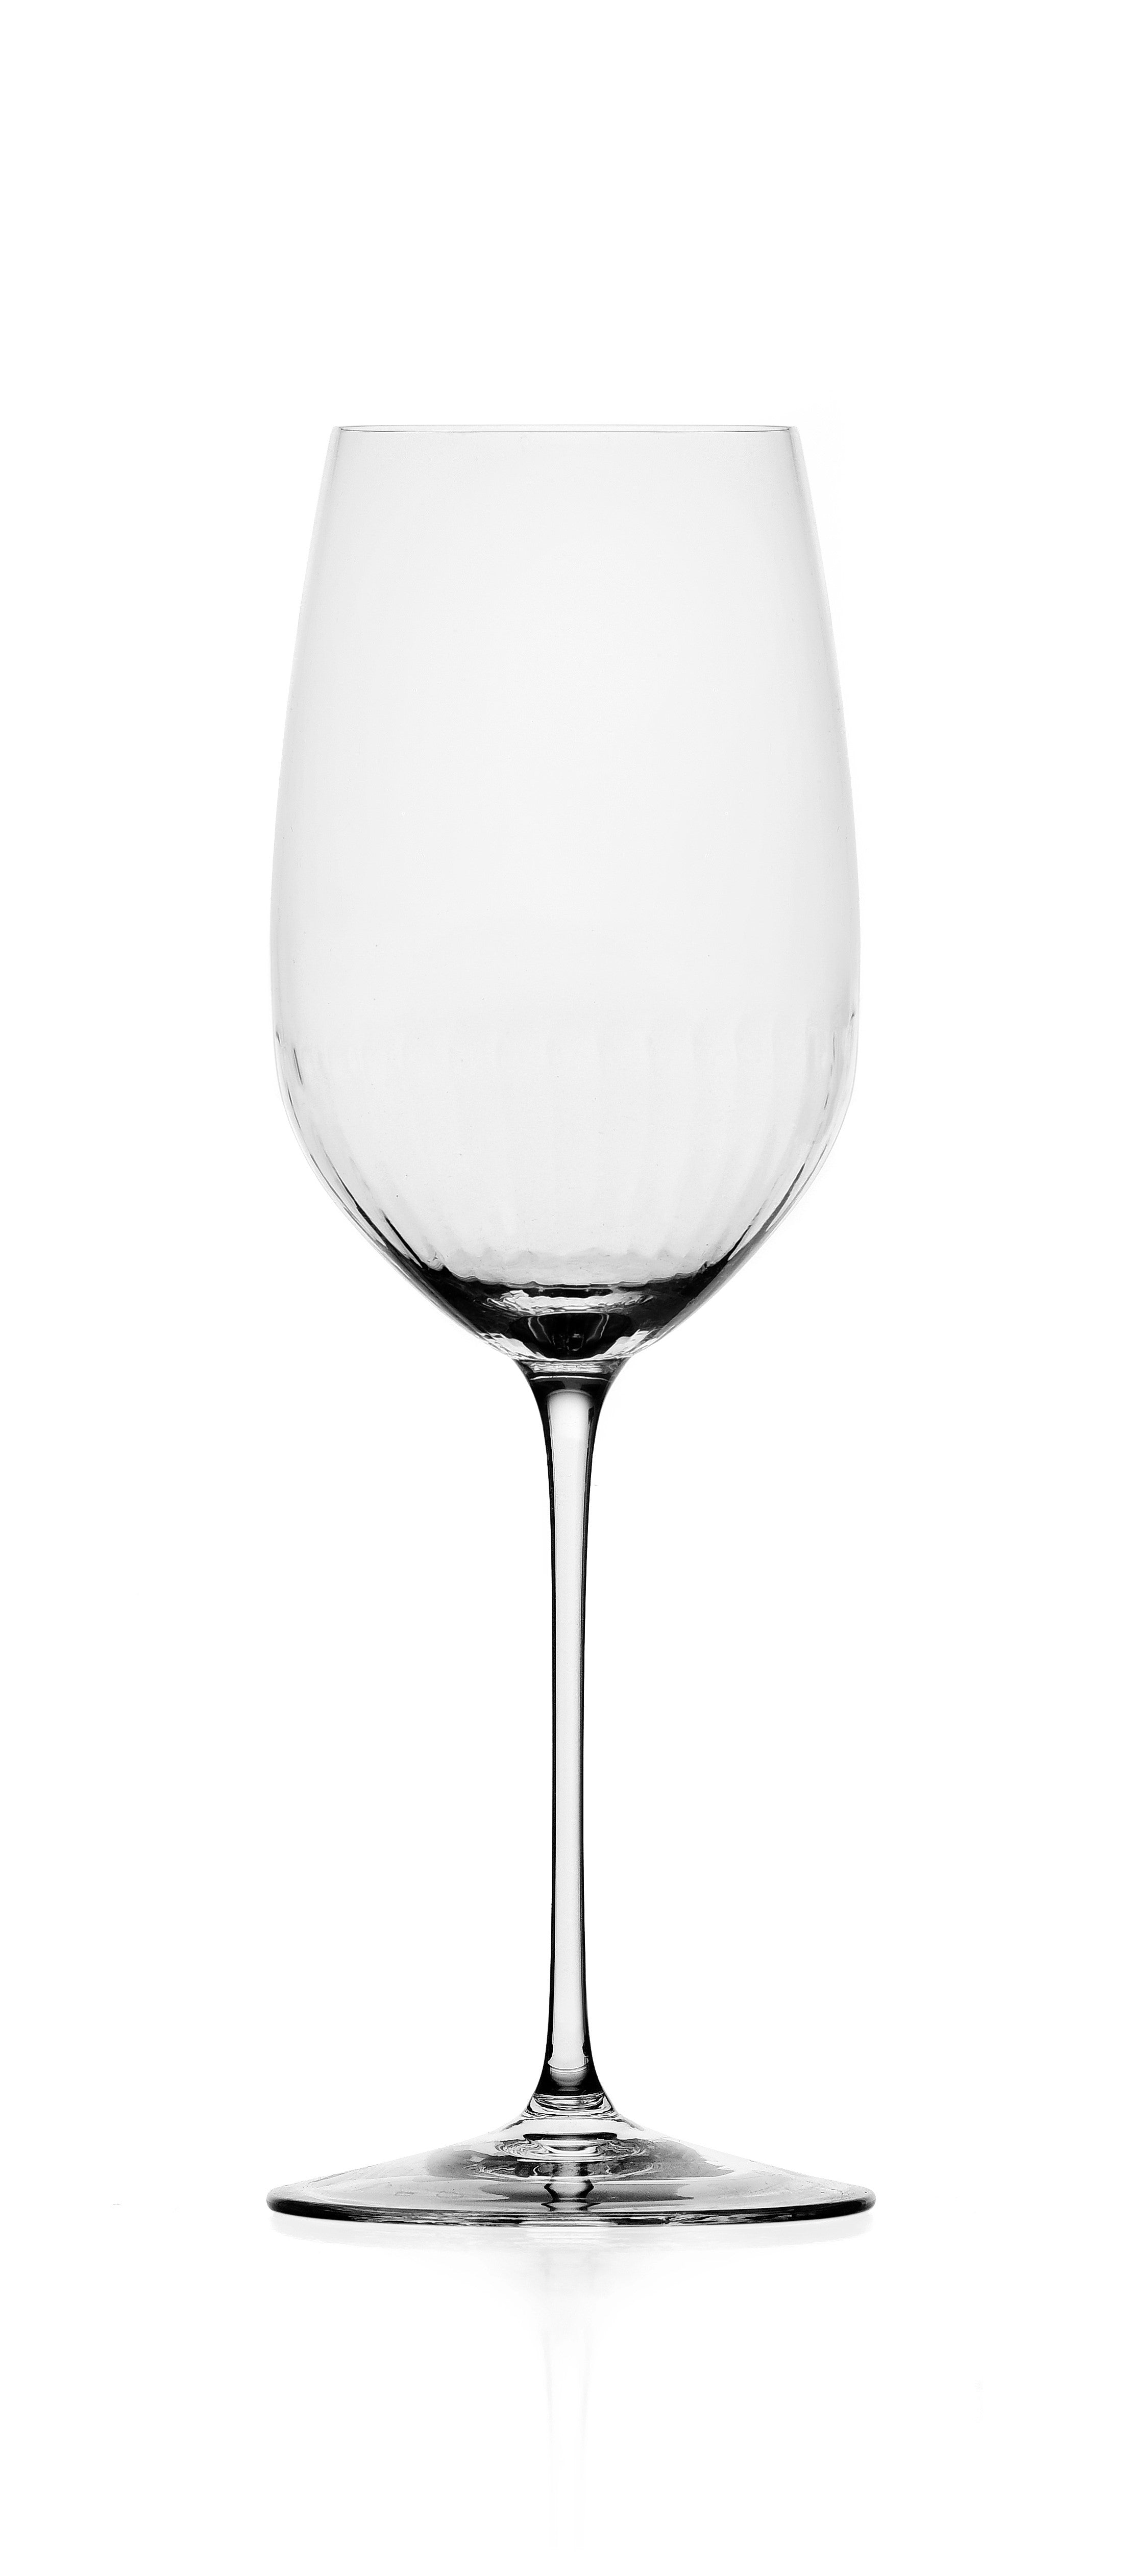 Ichendorf Solisti Set of 2 Riesling glasses with optical effect